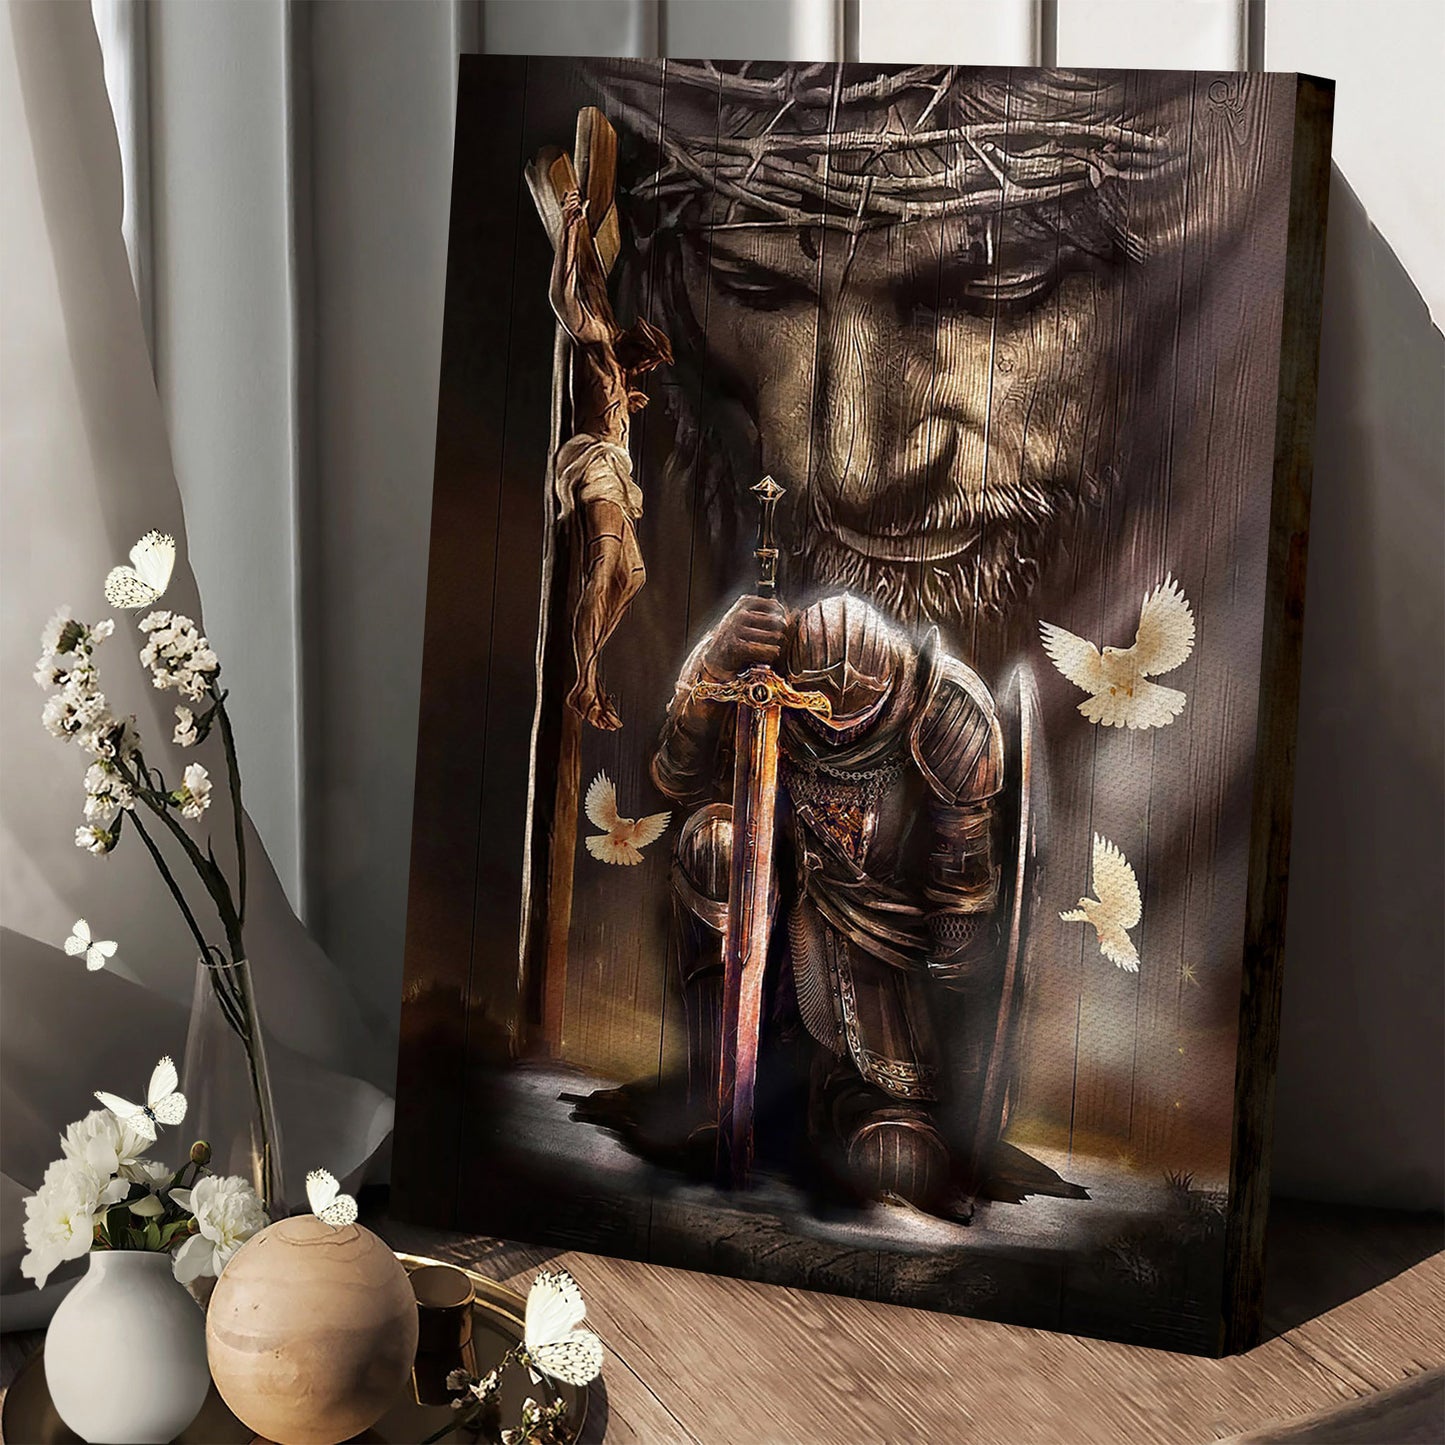 Jesus and Lion Painting - Jesus Canvas Art - Christian Wall Canvas